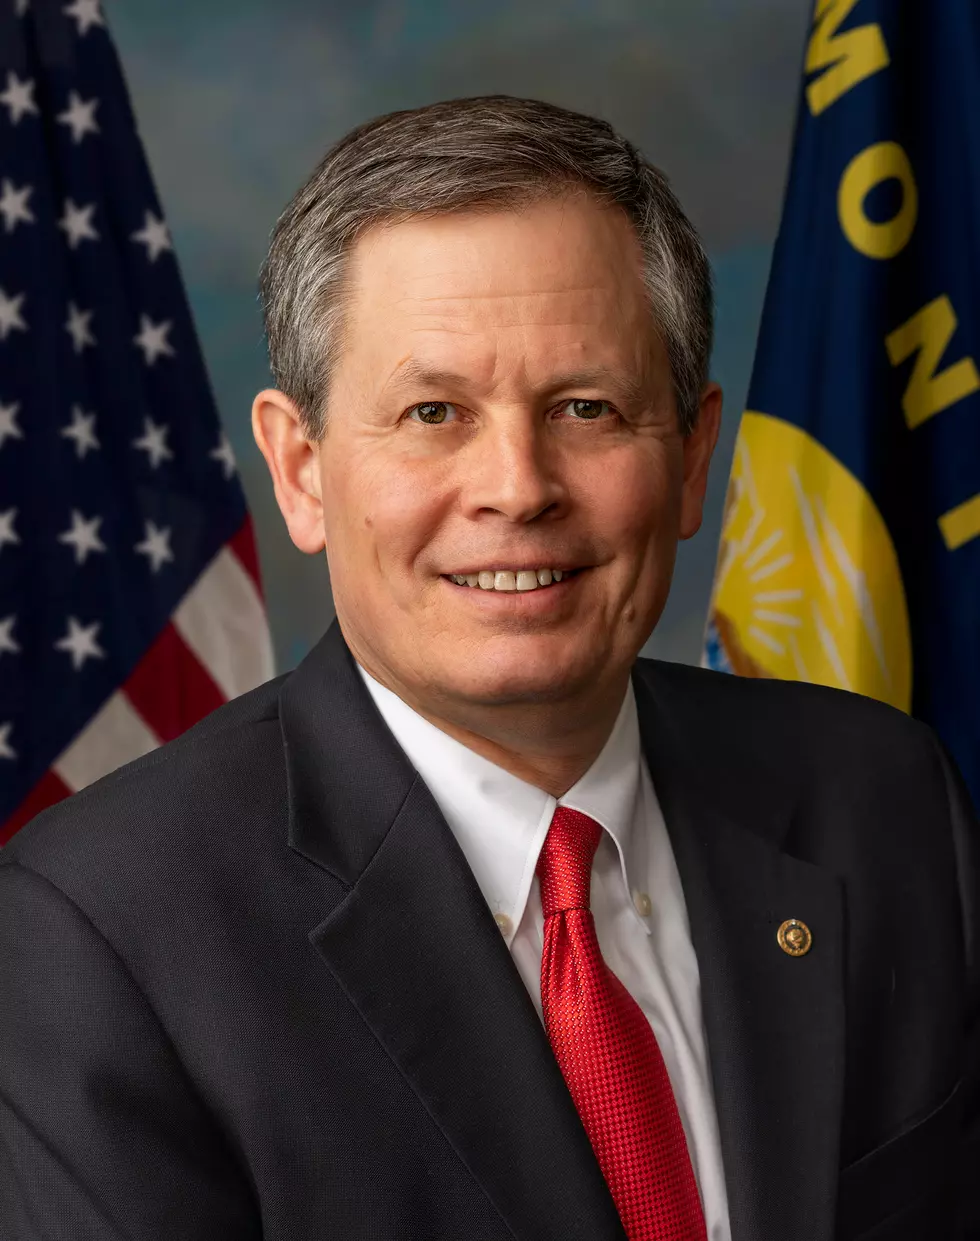 Senator Daines asked KMON to publish letter to listeners